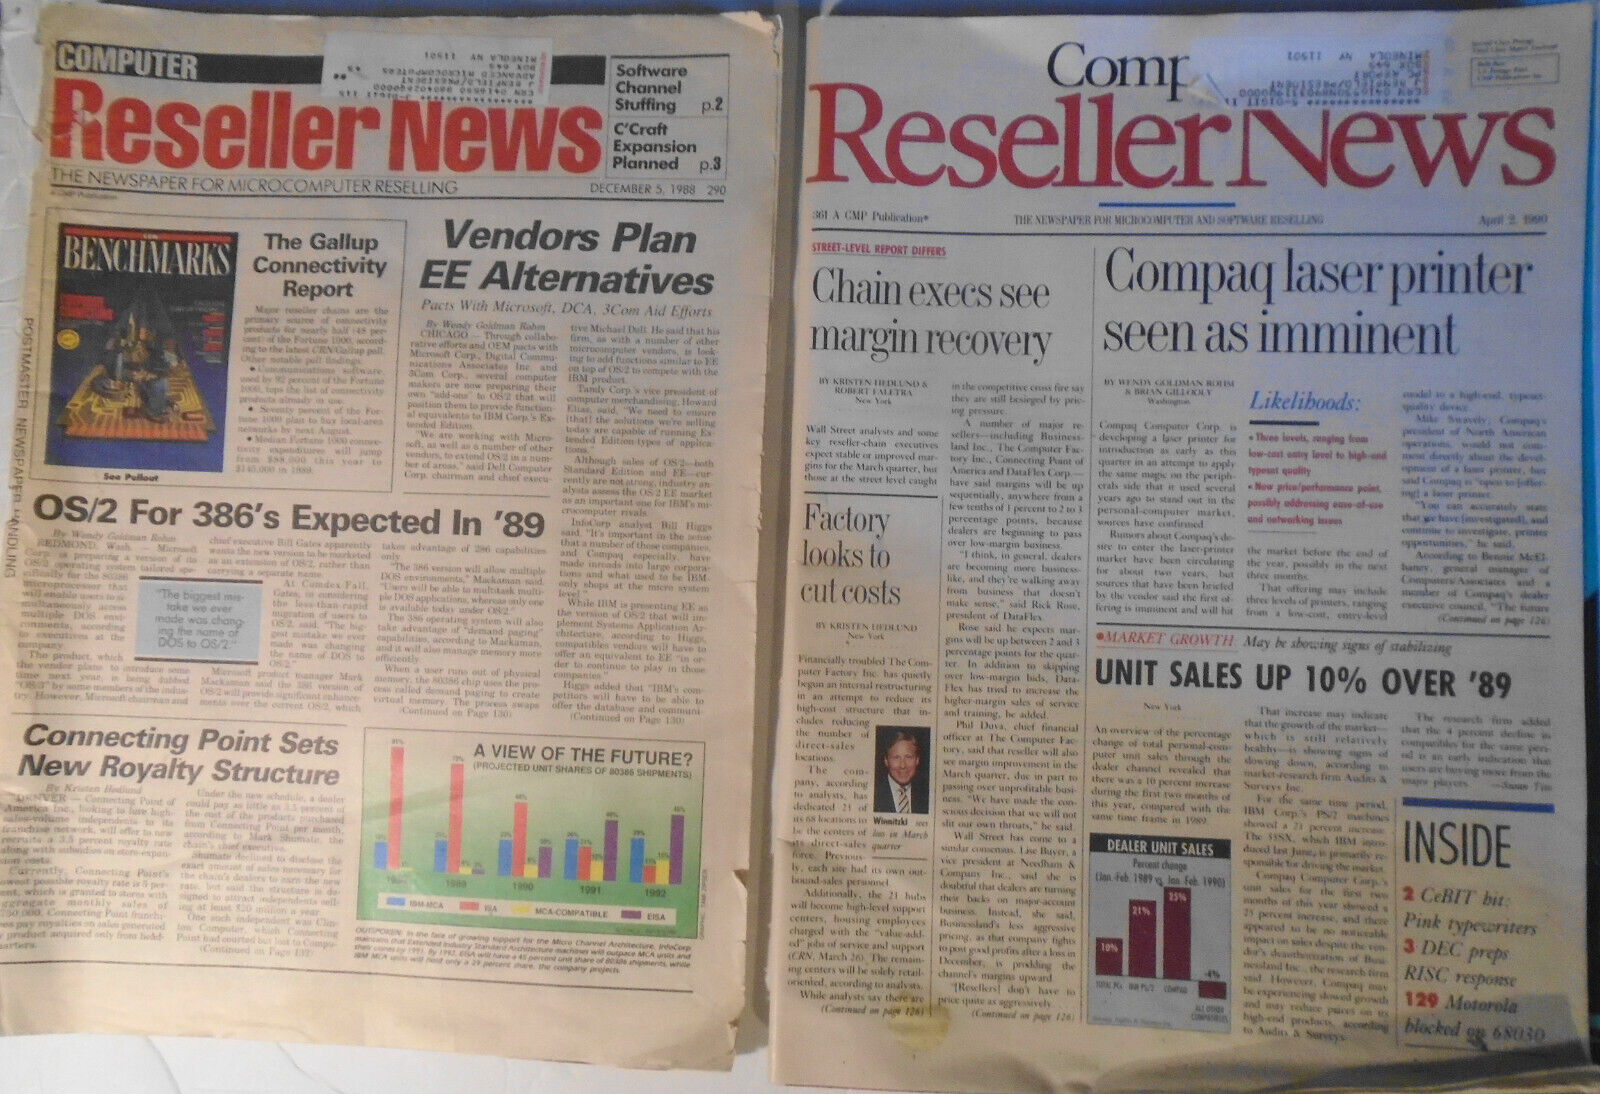 Computer Reseller News - 2 issues, April 2, 1990, & December 5, 1988